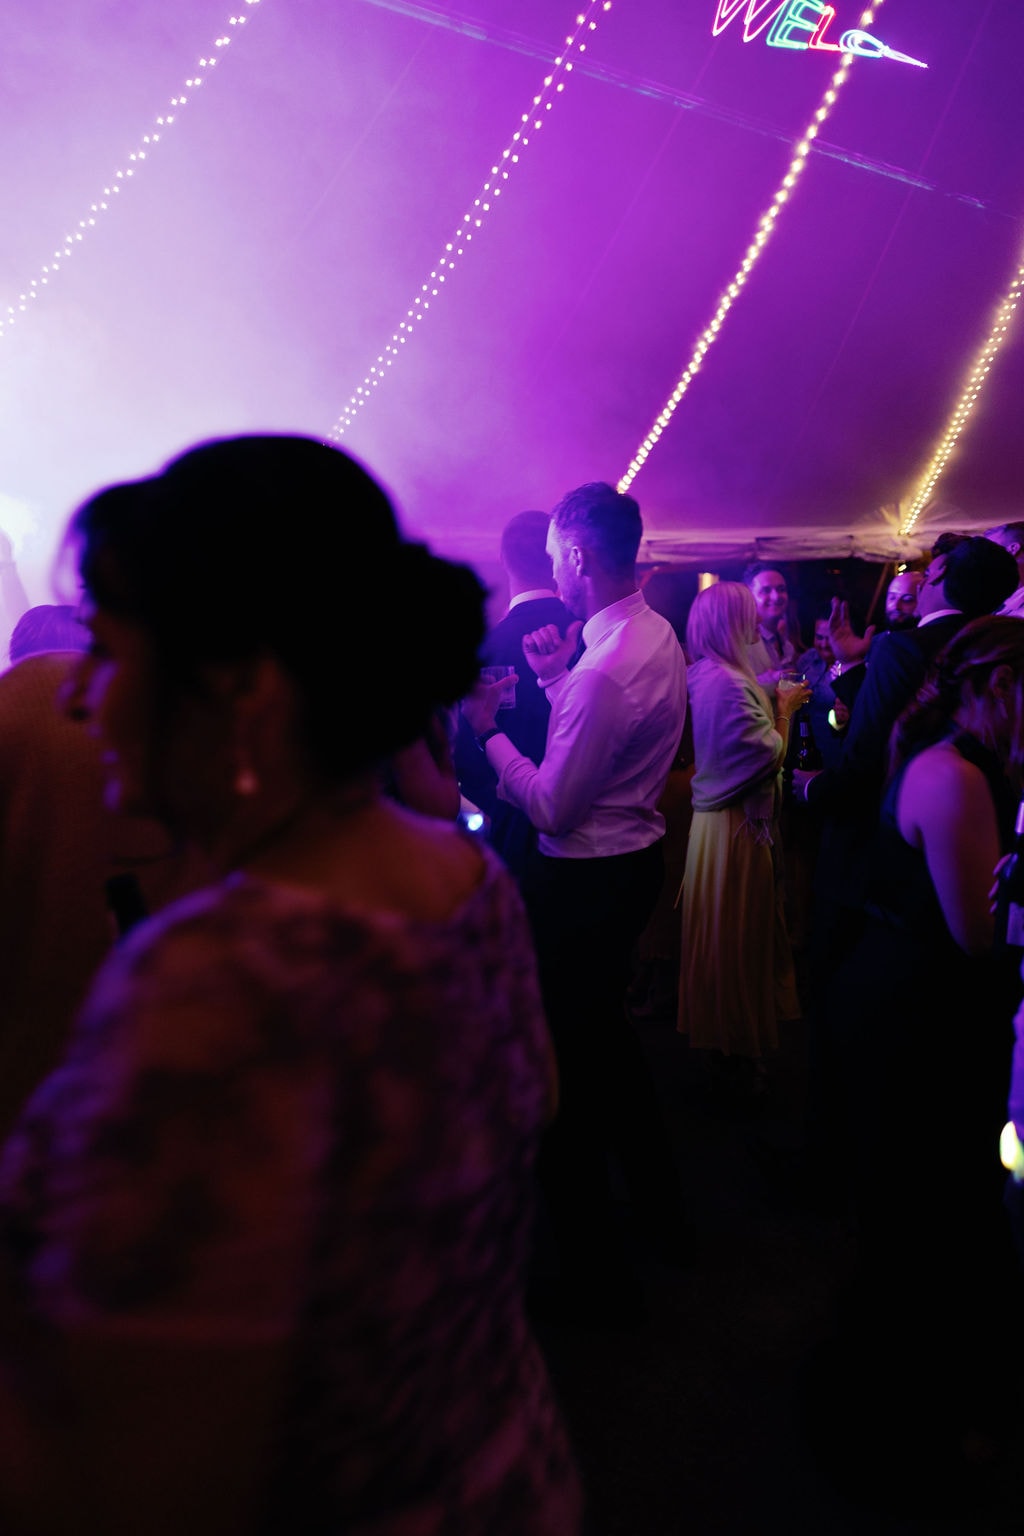 Epic dance floor photos at Blackstone Rivers Ranch wedding DJ'd by Ignight Entertainment with smoke and lazer show